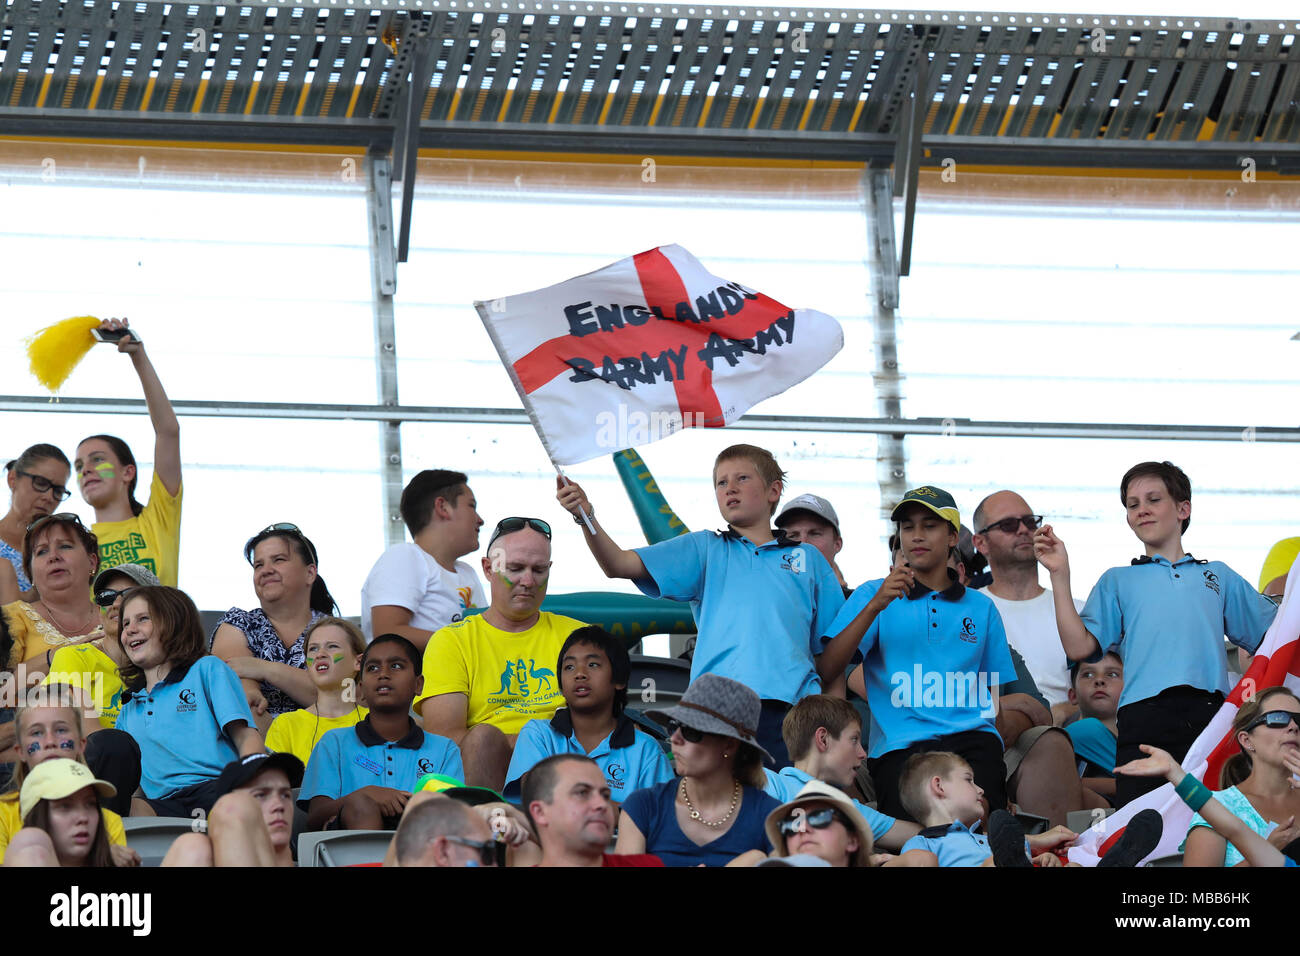 Queensland, Australia. 10th Apr, 2018. A child from Coffee Camp Public School with a Barmy Army 'Down Under 2018' flag at the Athletics on 10.04.18 Credit: Ben Booth/Alamy Live News Stock Photo